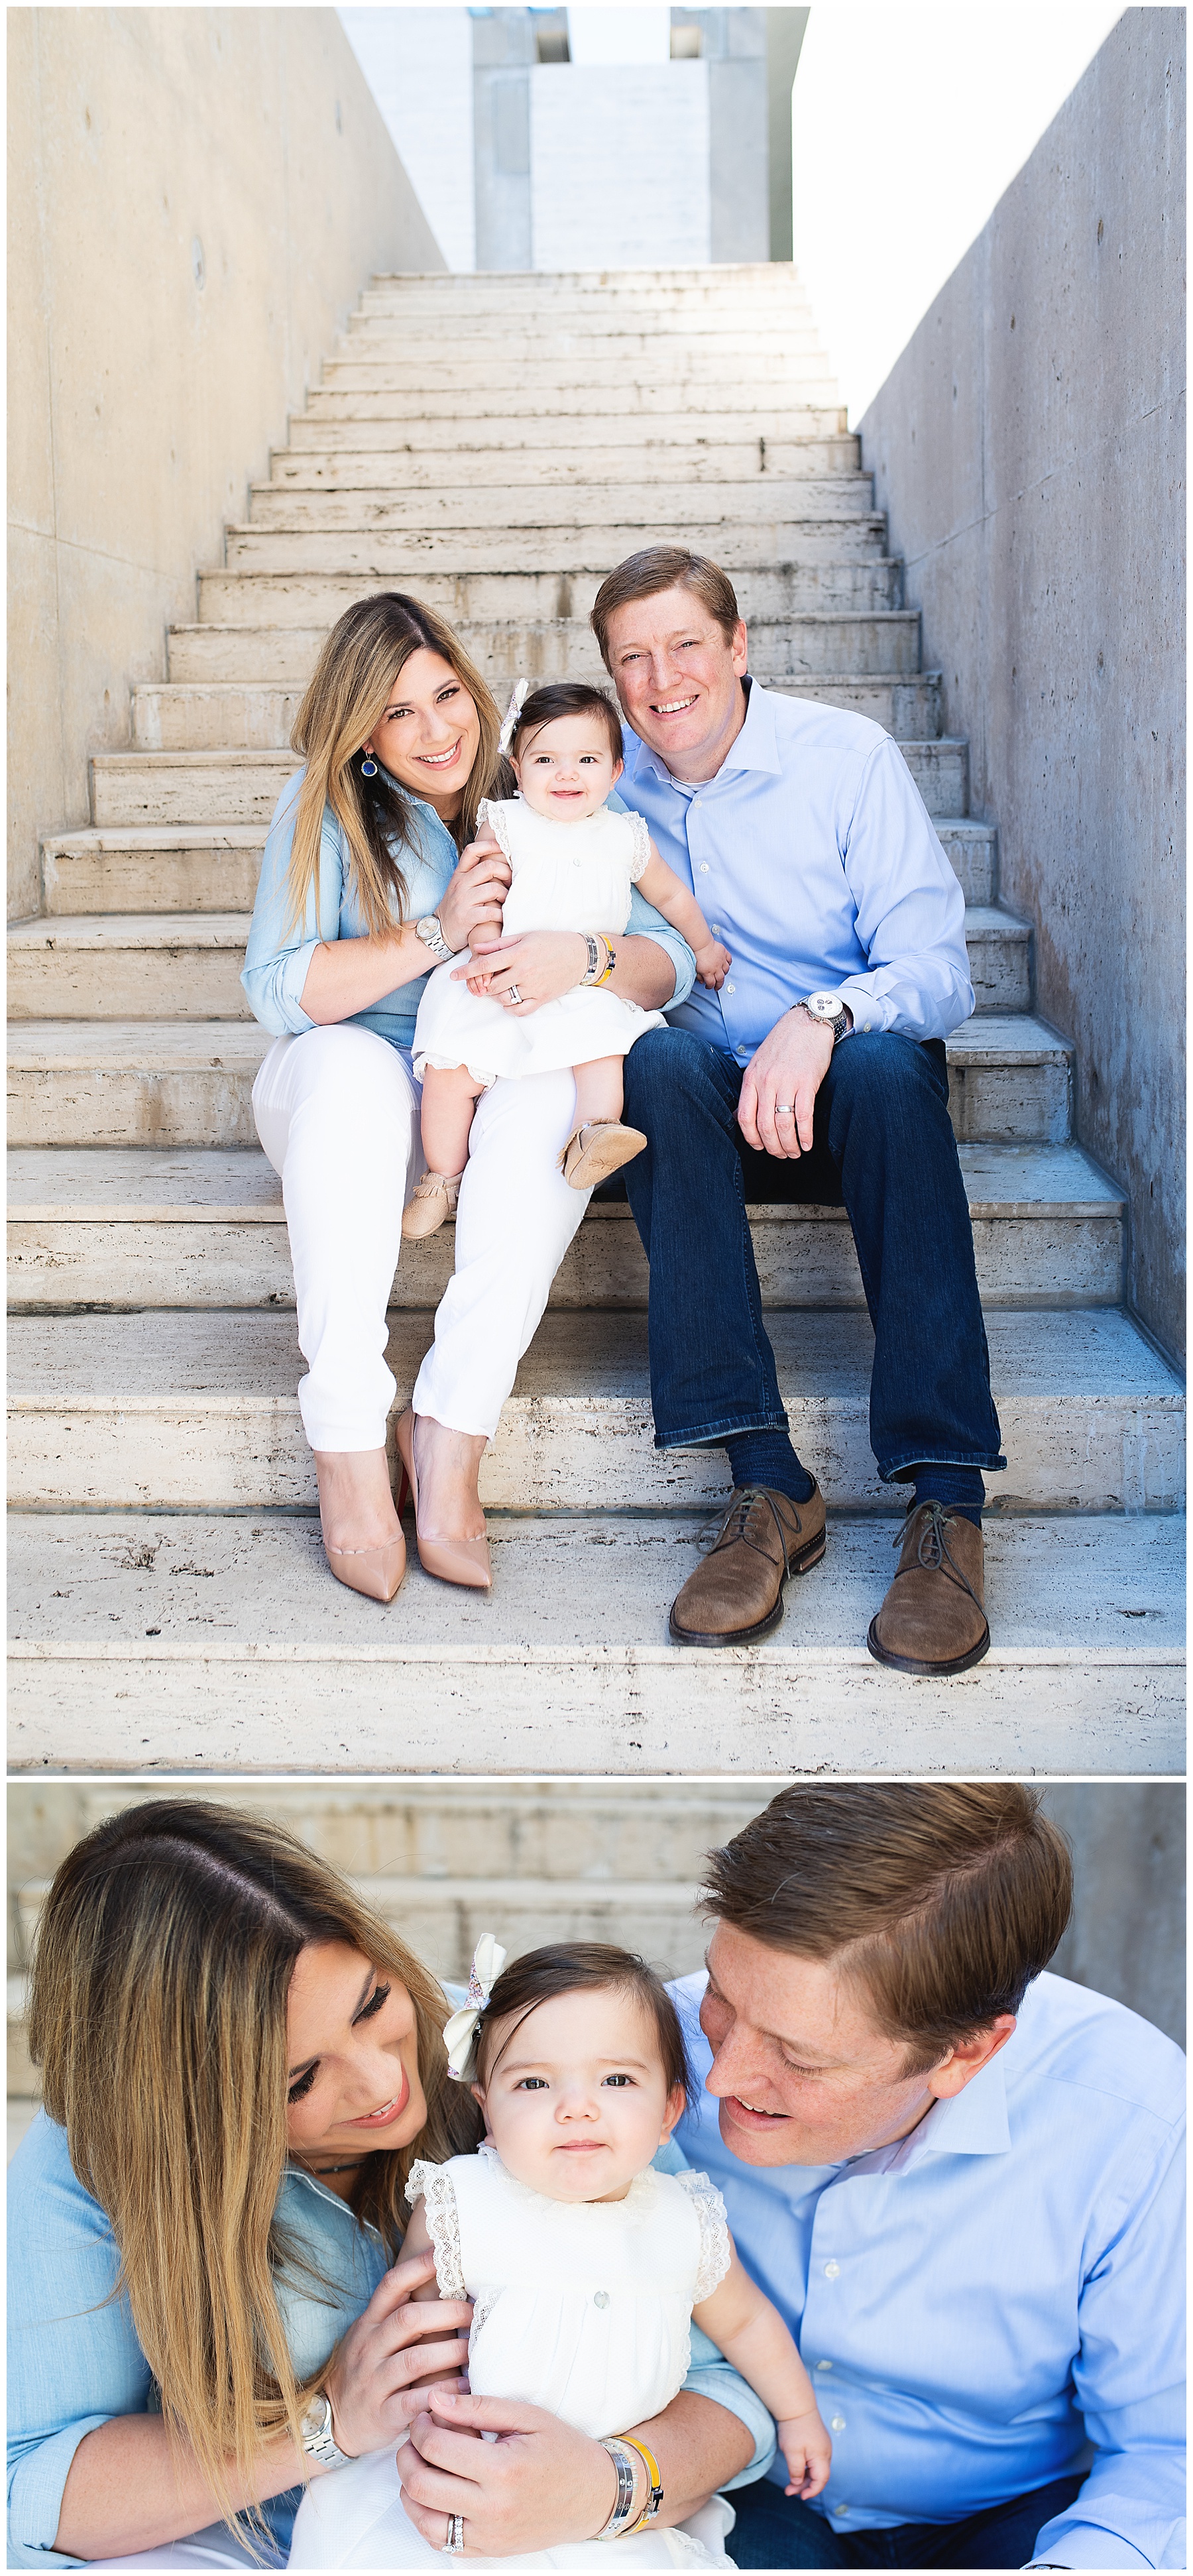 mom, dad, and baby girl sitting on steps smiling